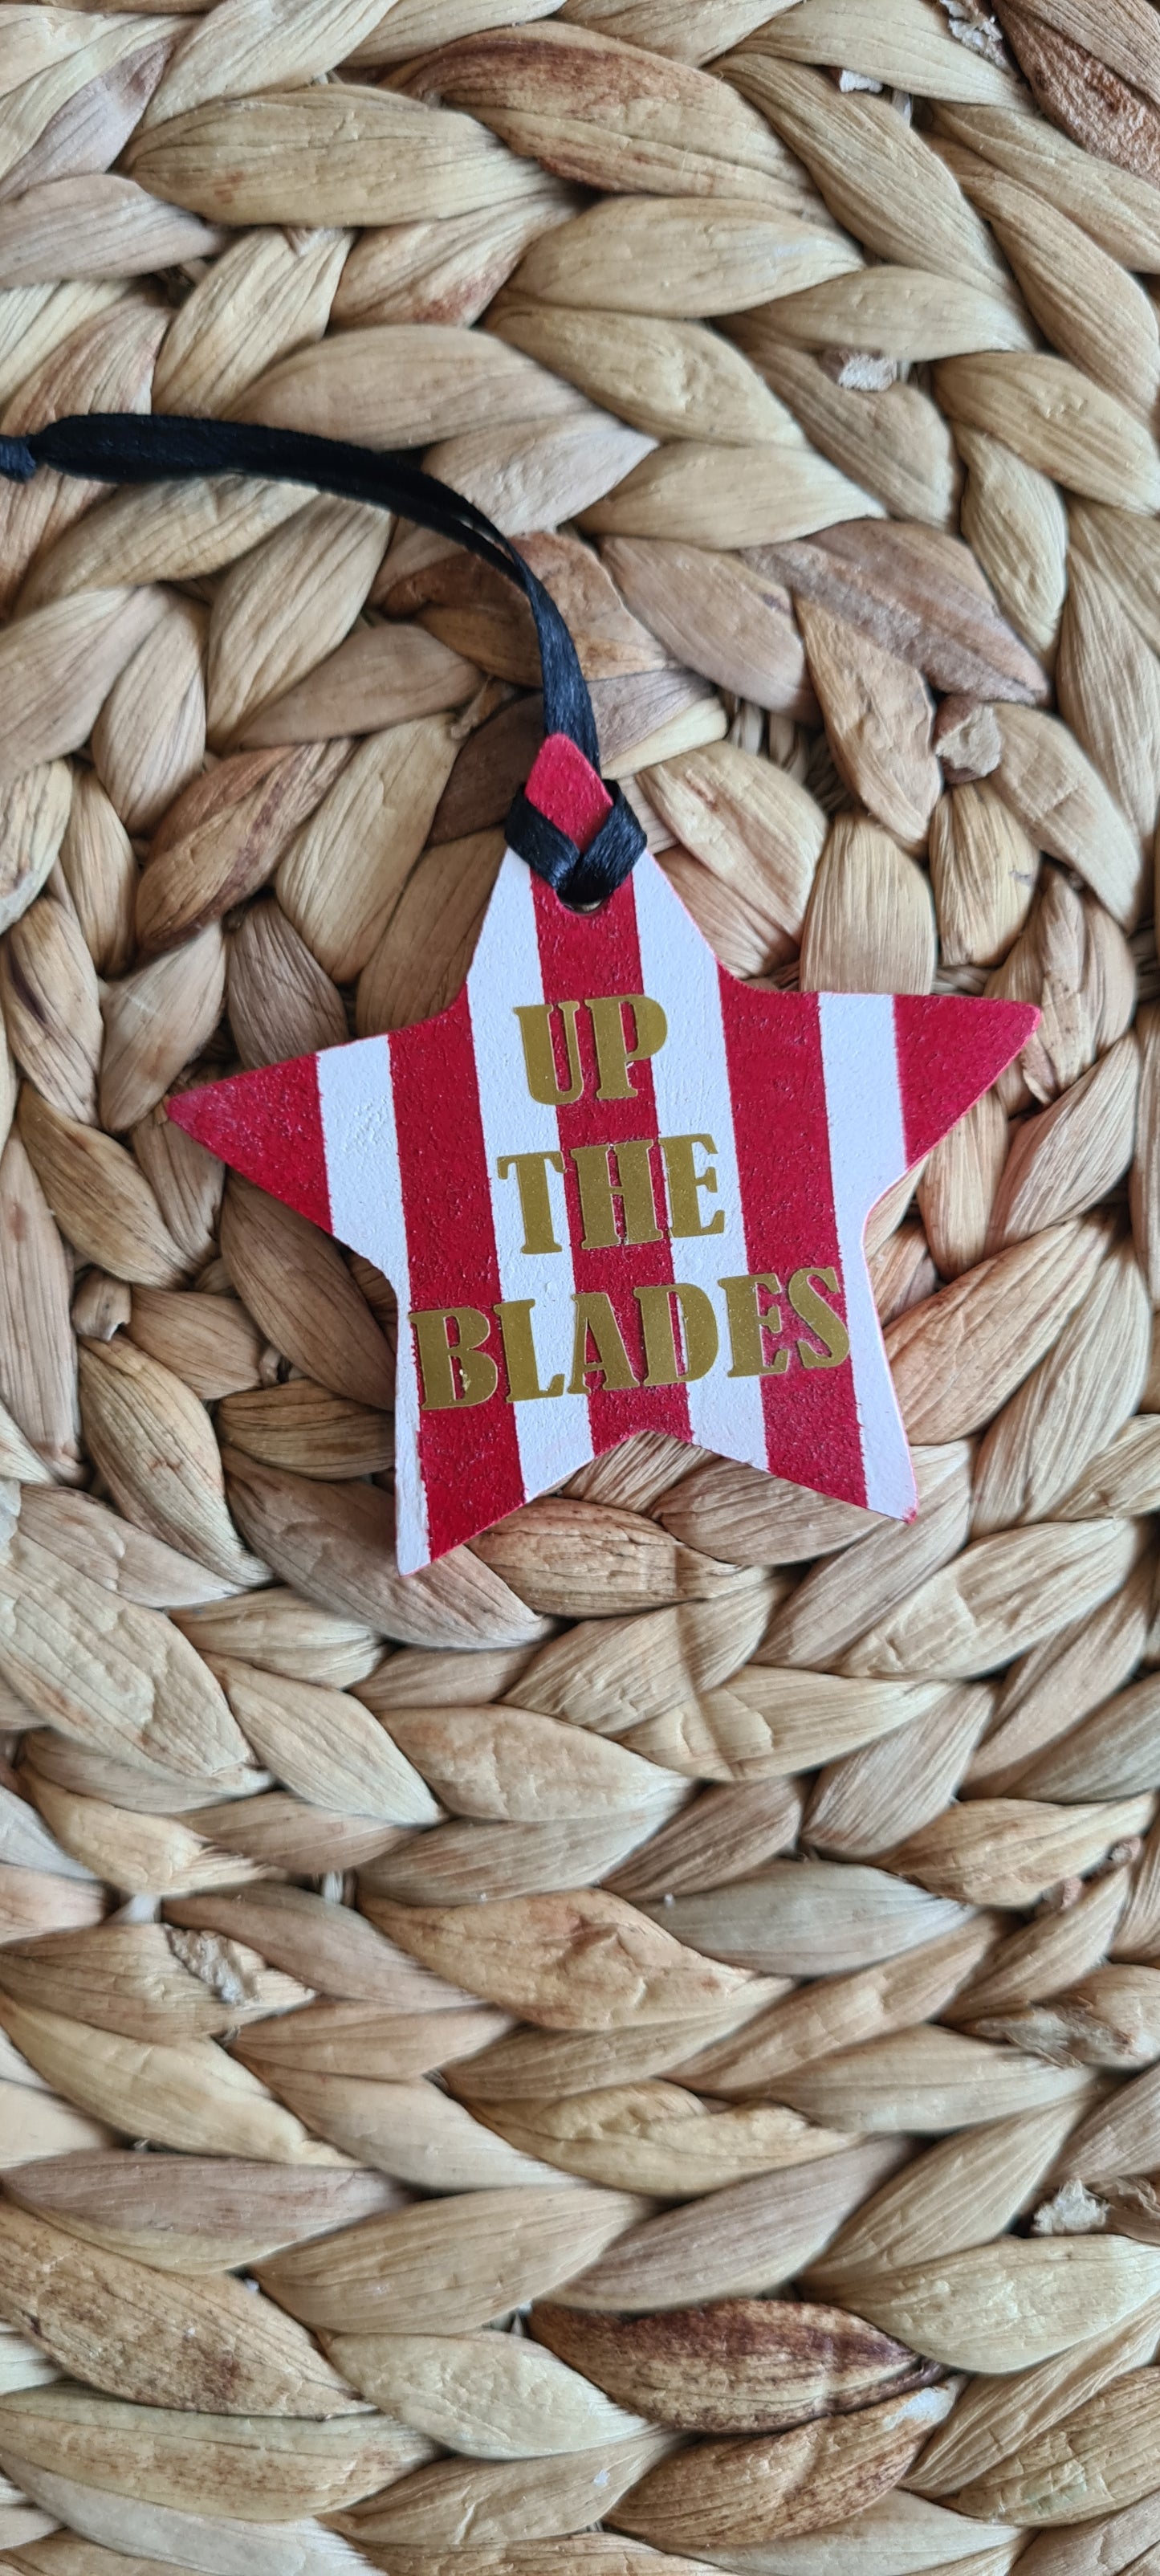 'Up the blades' Hanging Decoration Small